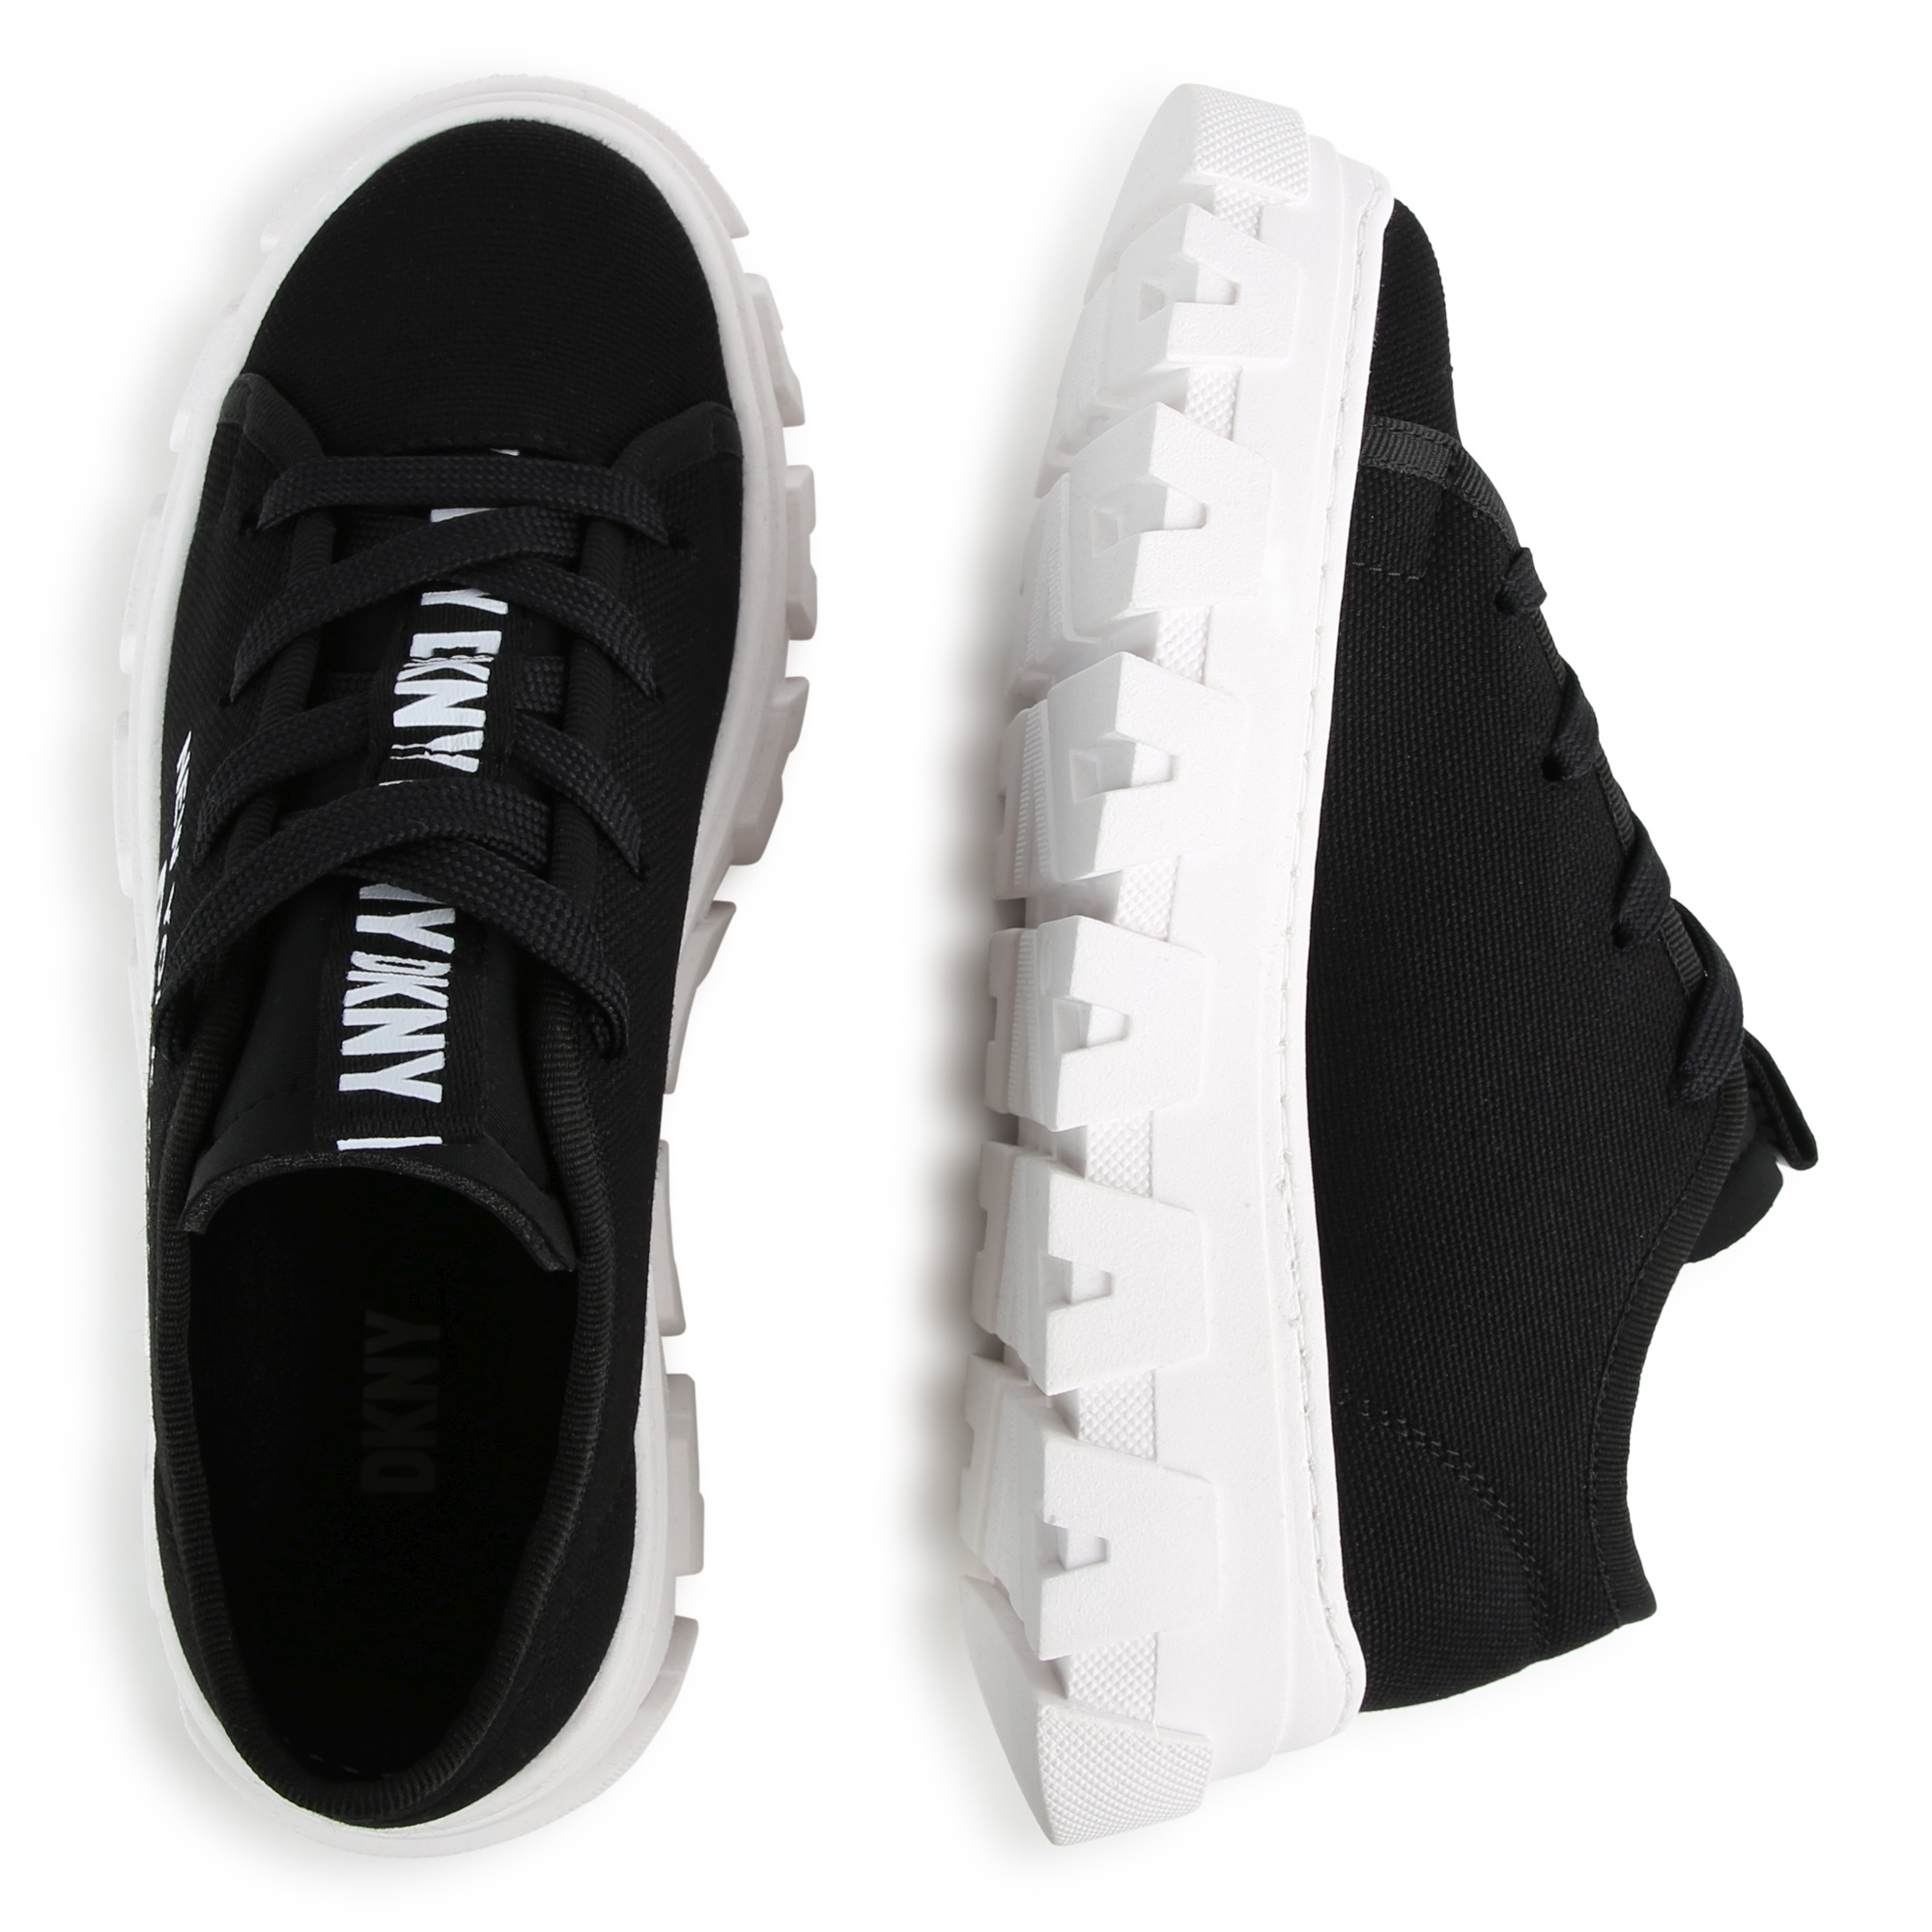 Canvas trainers DKNY for GIRL